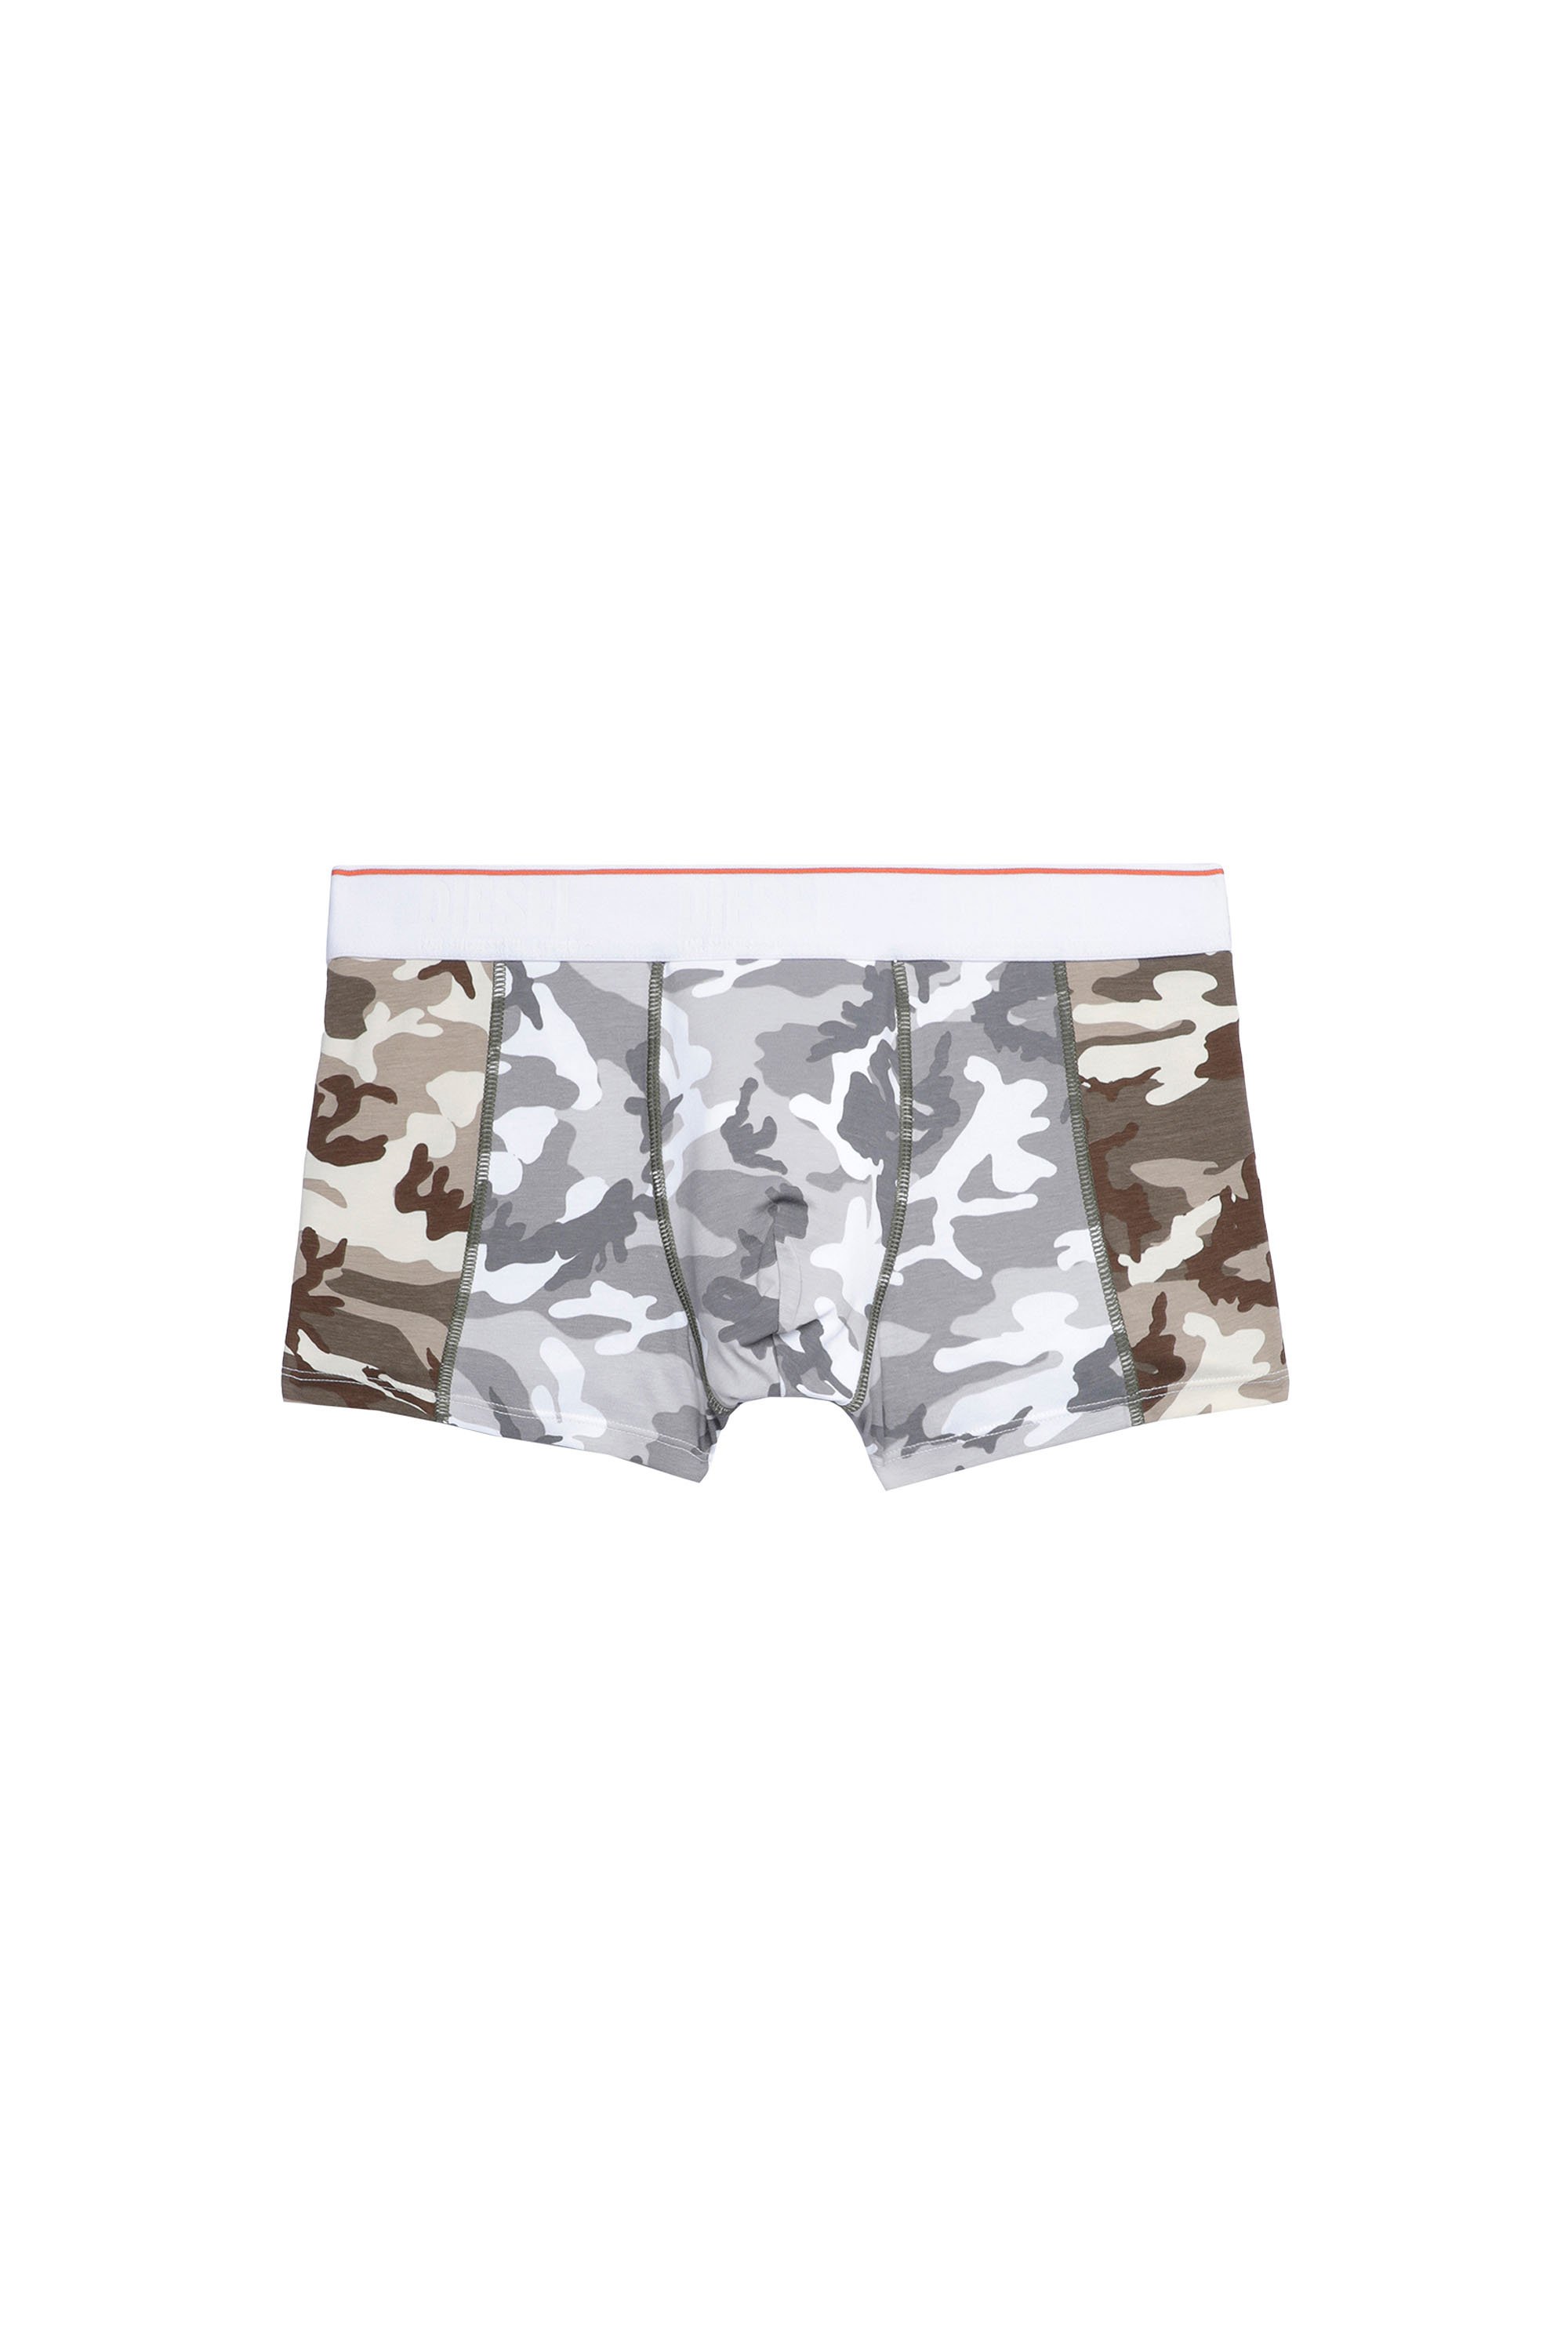 3 pcs. New Russian Army Soldiers Military Underwear  Camouflage Boxers Trunks